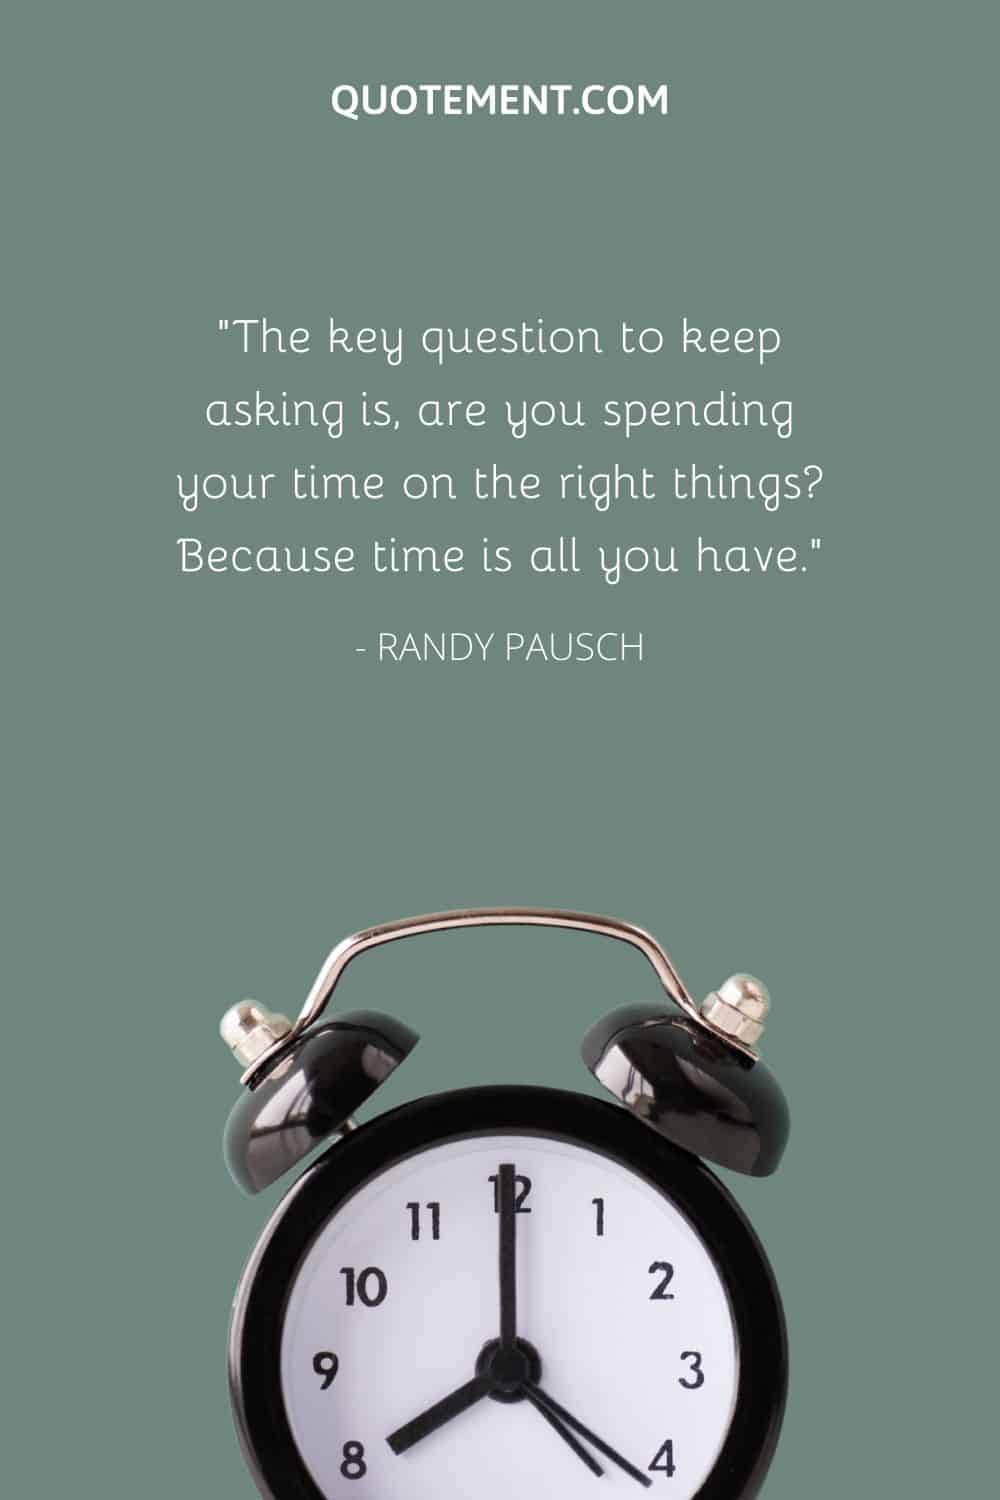 The key question to keep asking is, are you spending your time on the right things